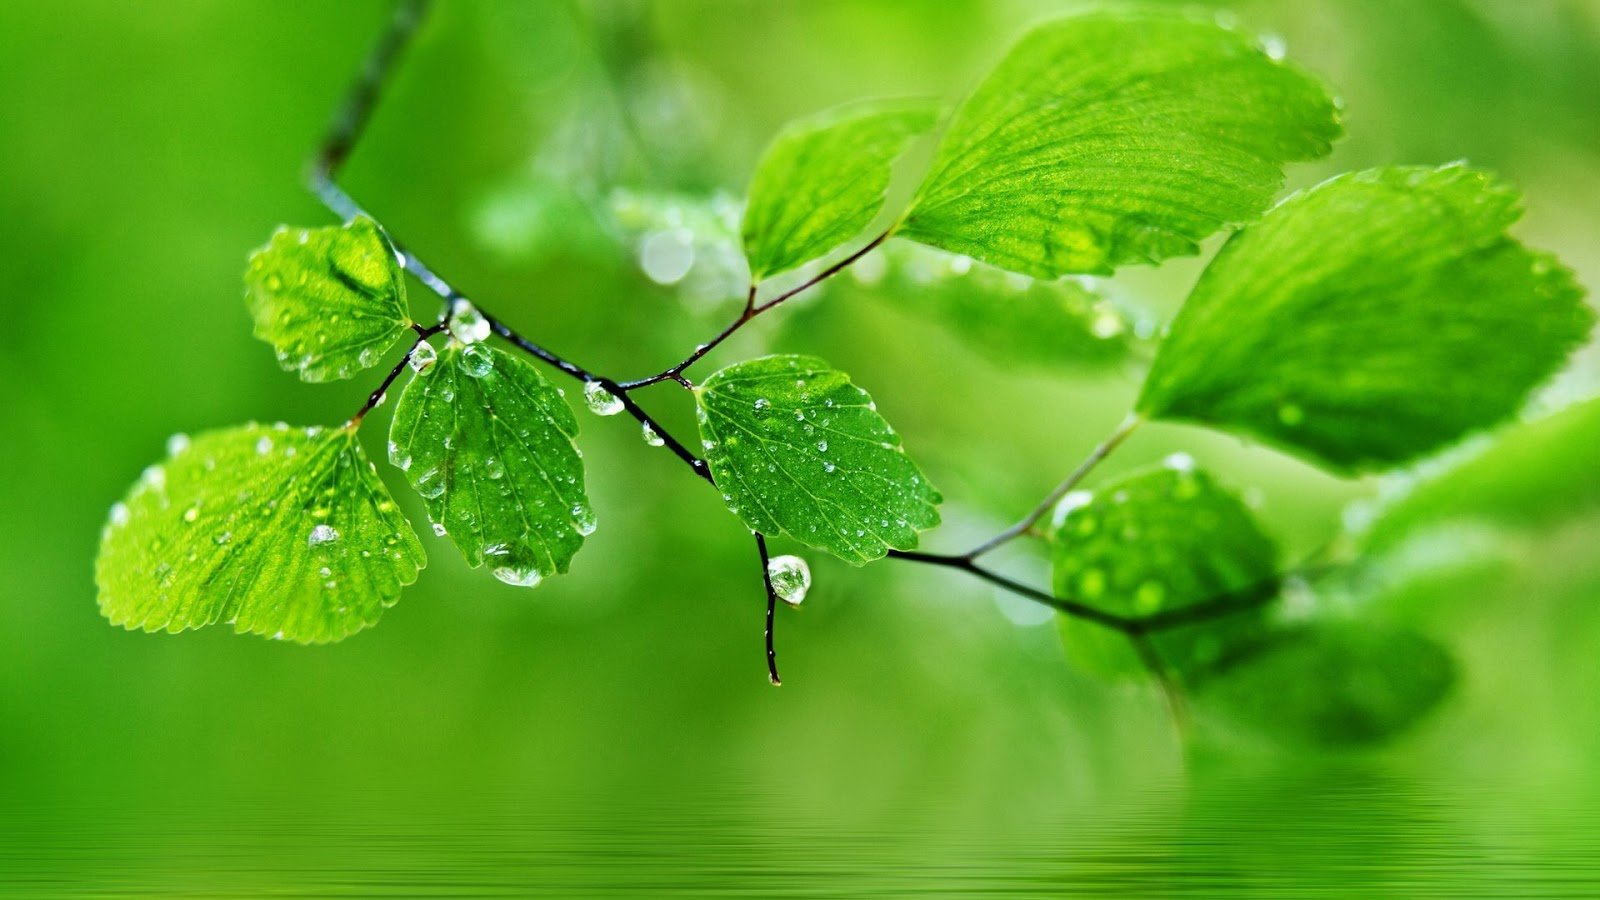 wallpapers hd green leaves water droplets ripple hd picture water drop 1600x900